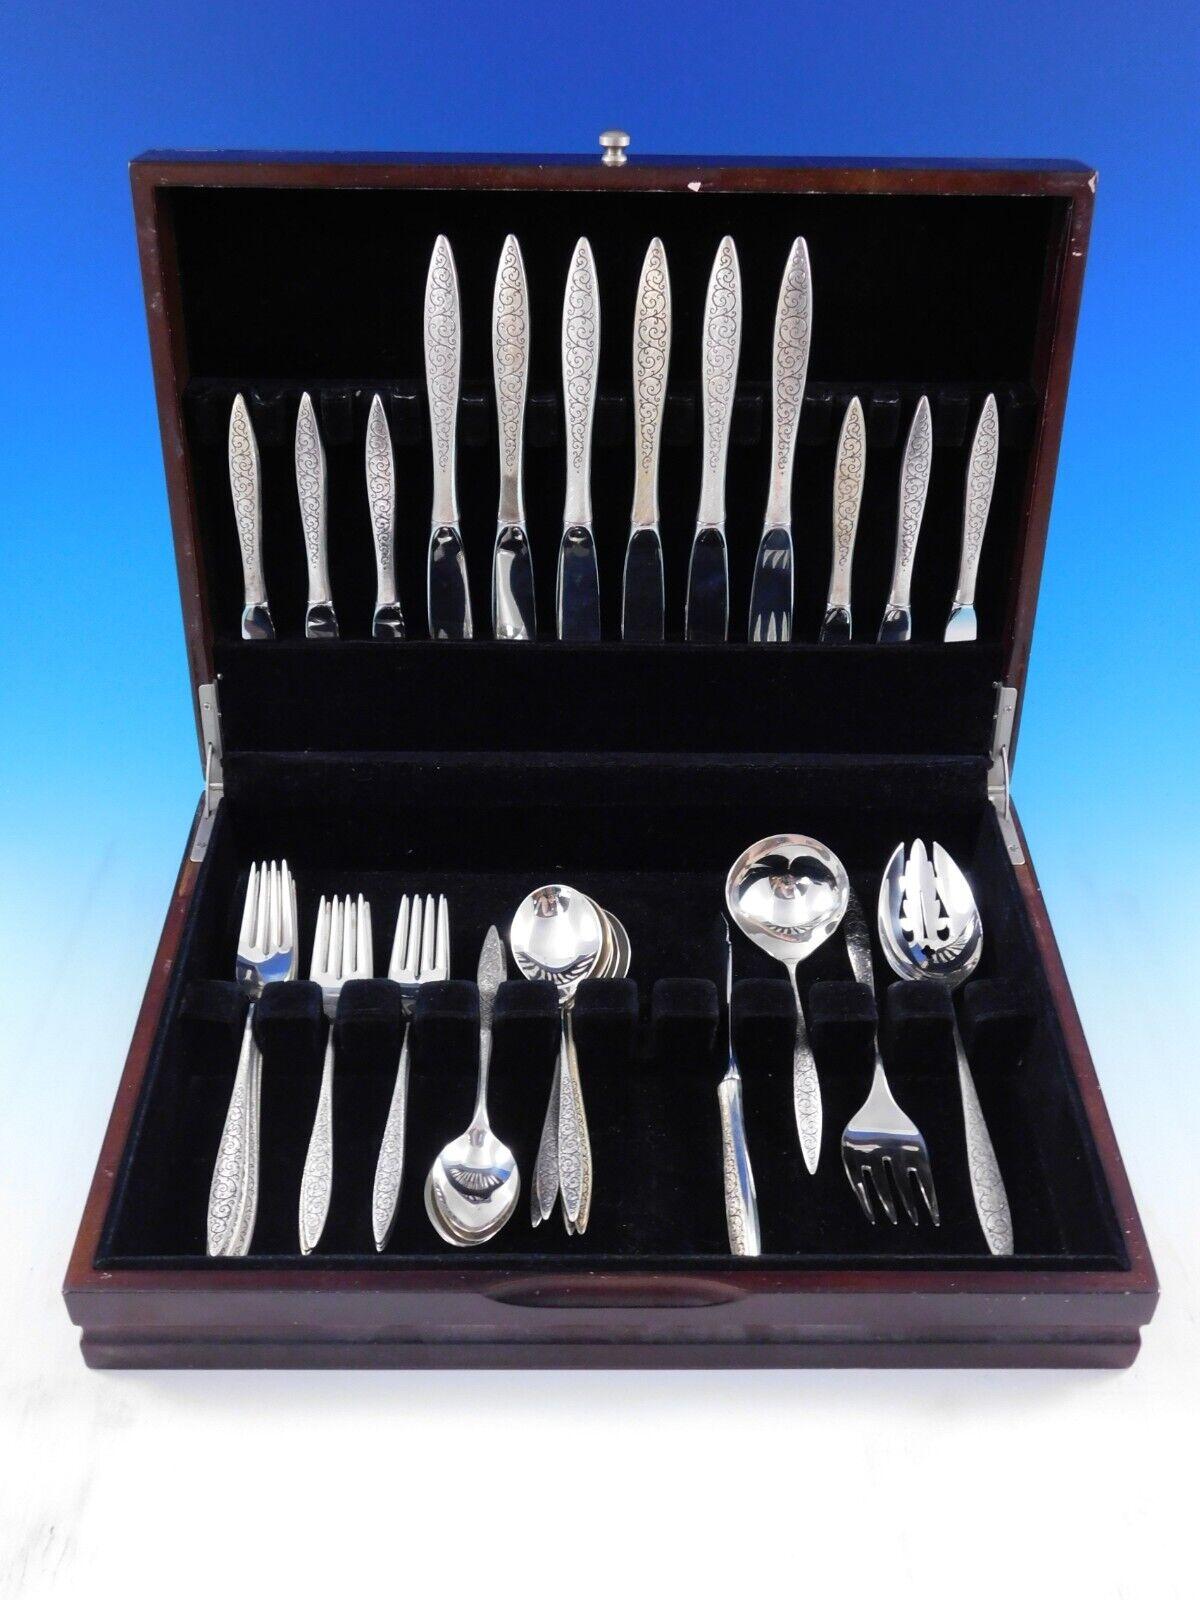 Spanish Lace by Wallace Sterling Silberbesteck - 40 Teile. Dieses Set enthält:

6 Messer, 9 1/4